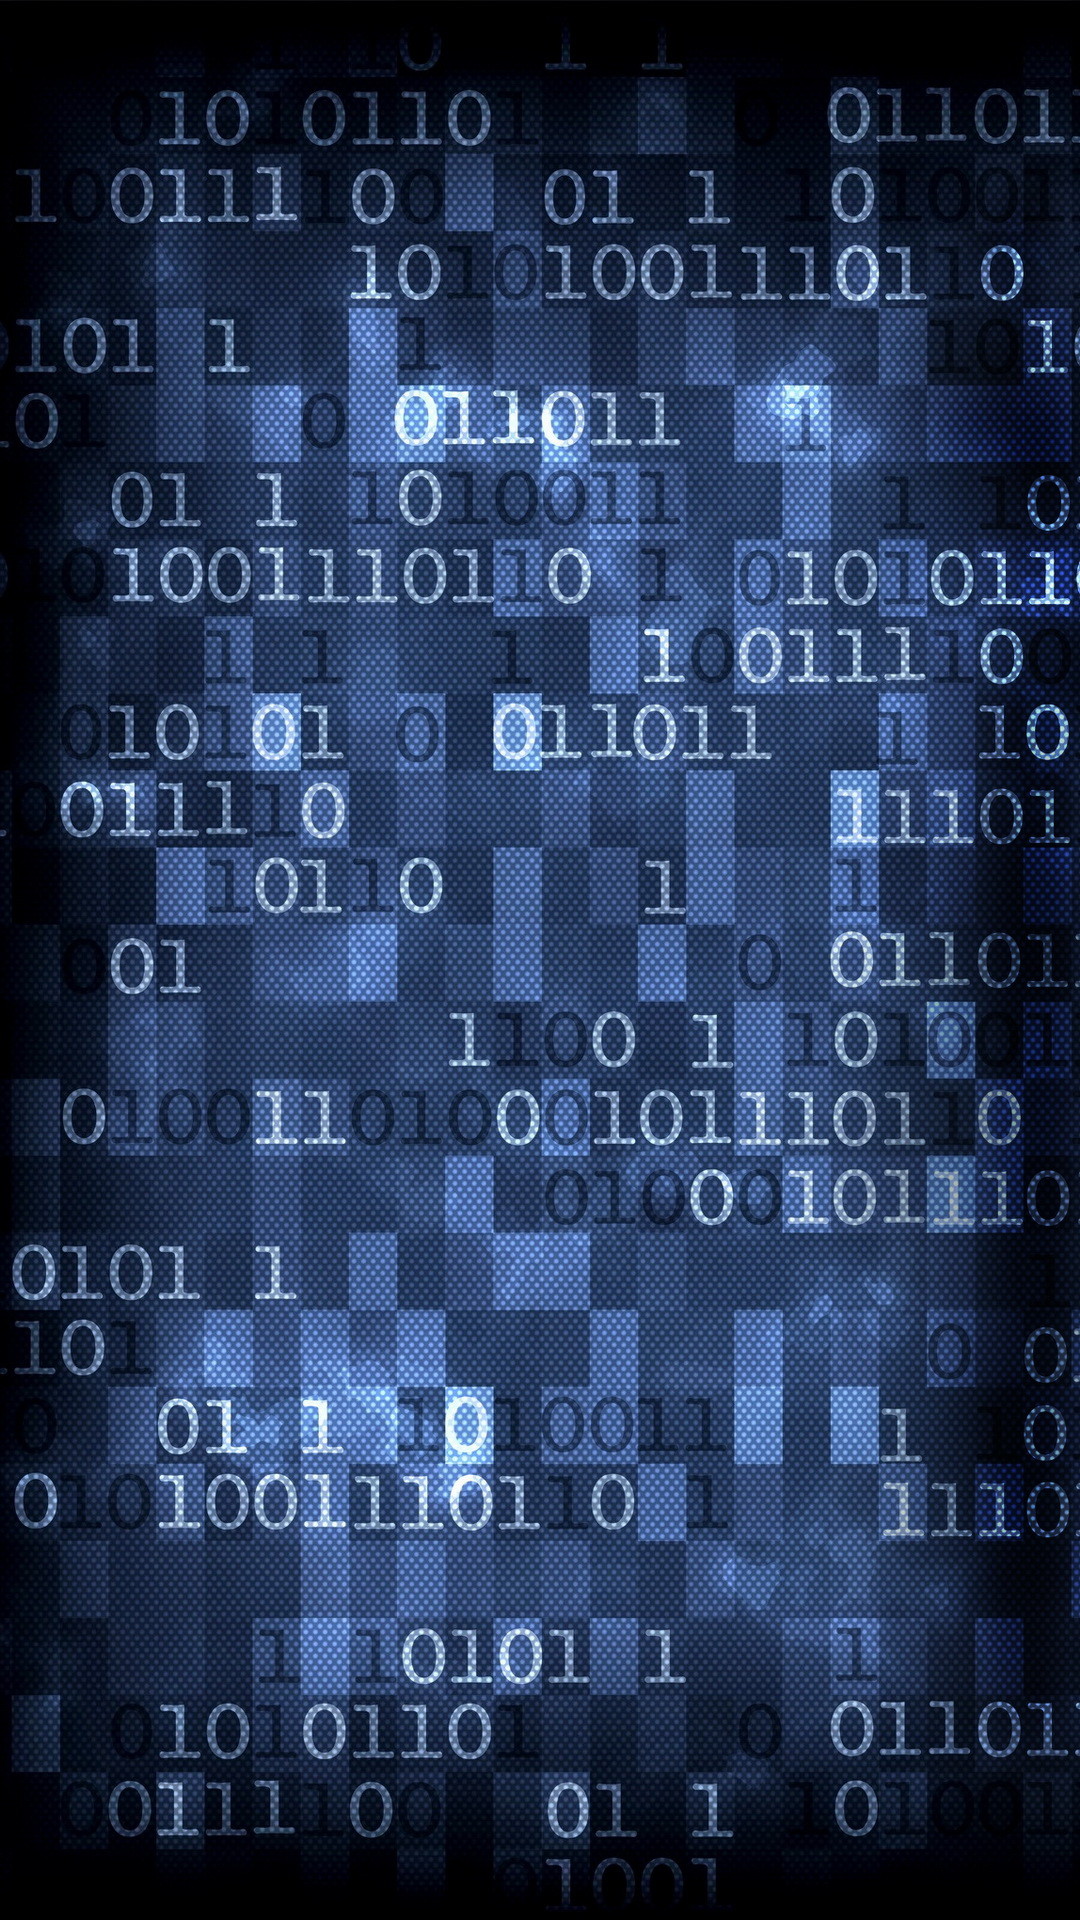 1080x1920 Binary background - The iPhone Wallpapers